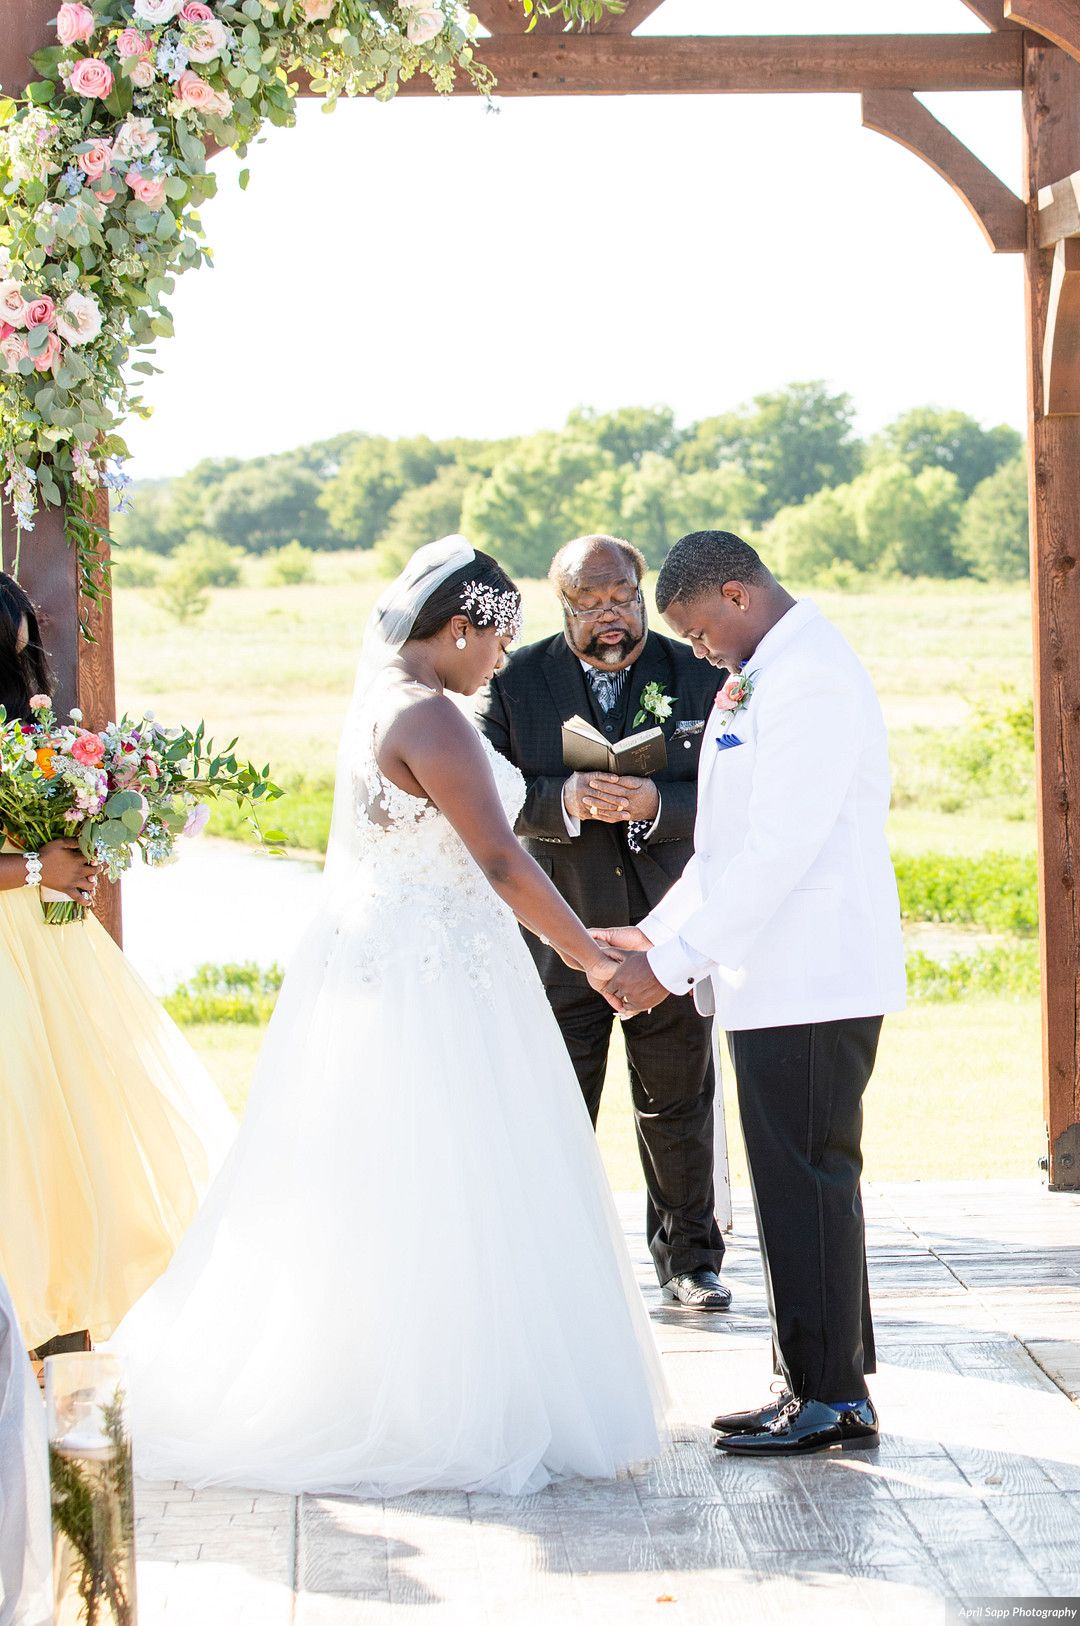 multicultural wedding ceremony with April Sapp Photography